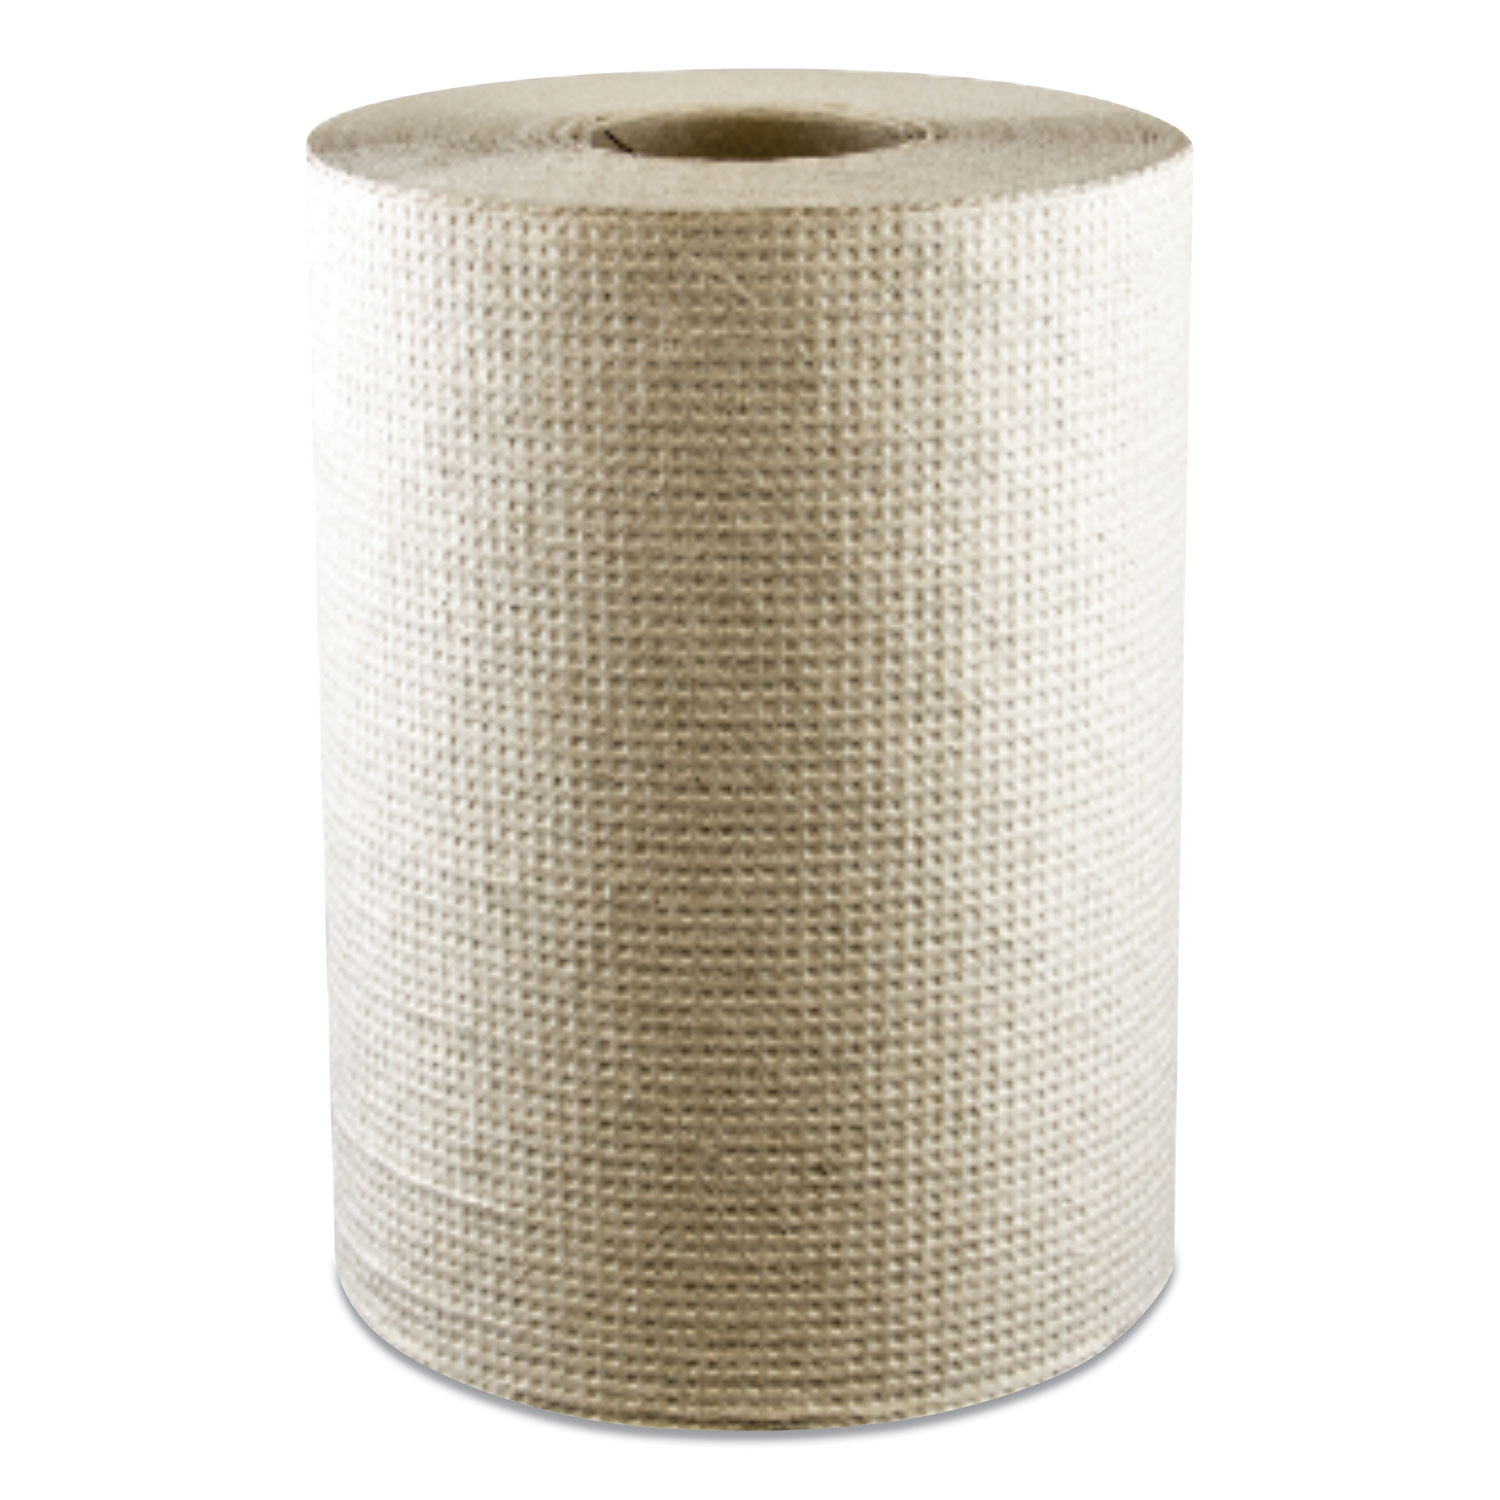  Morcon Tissue 12300R Morsoft Universal Roll Towels, 7.88 x 300 ft, Brown, 12/Carton (MOR12300R) 